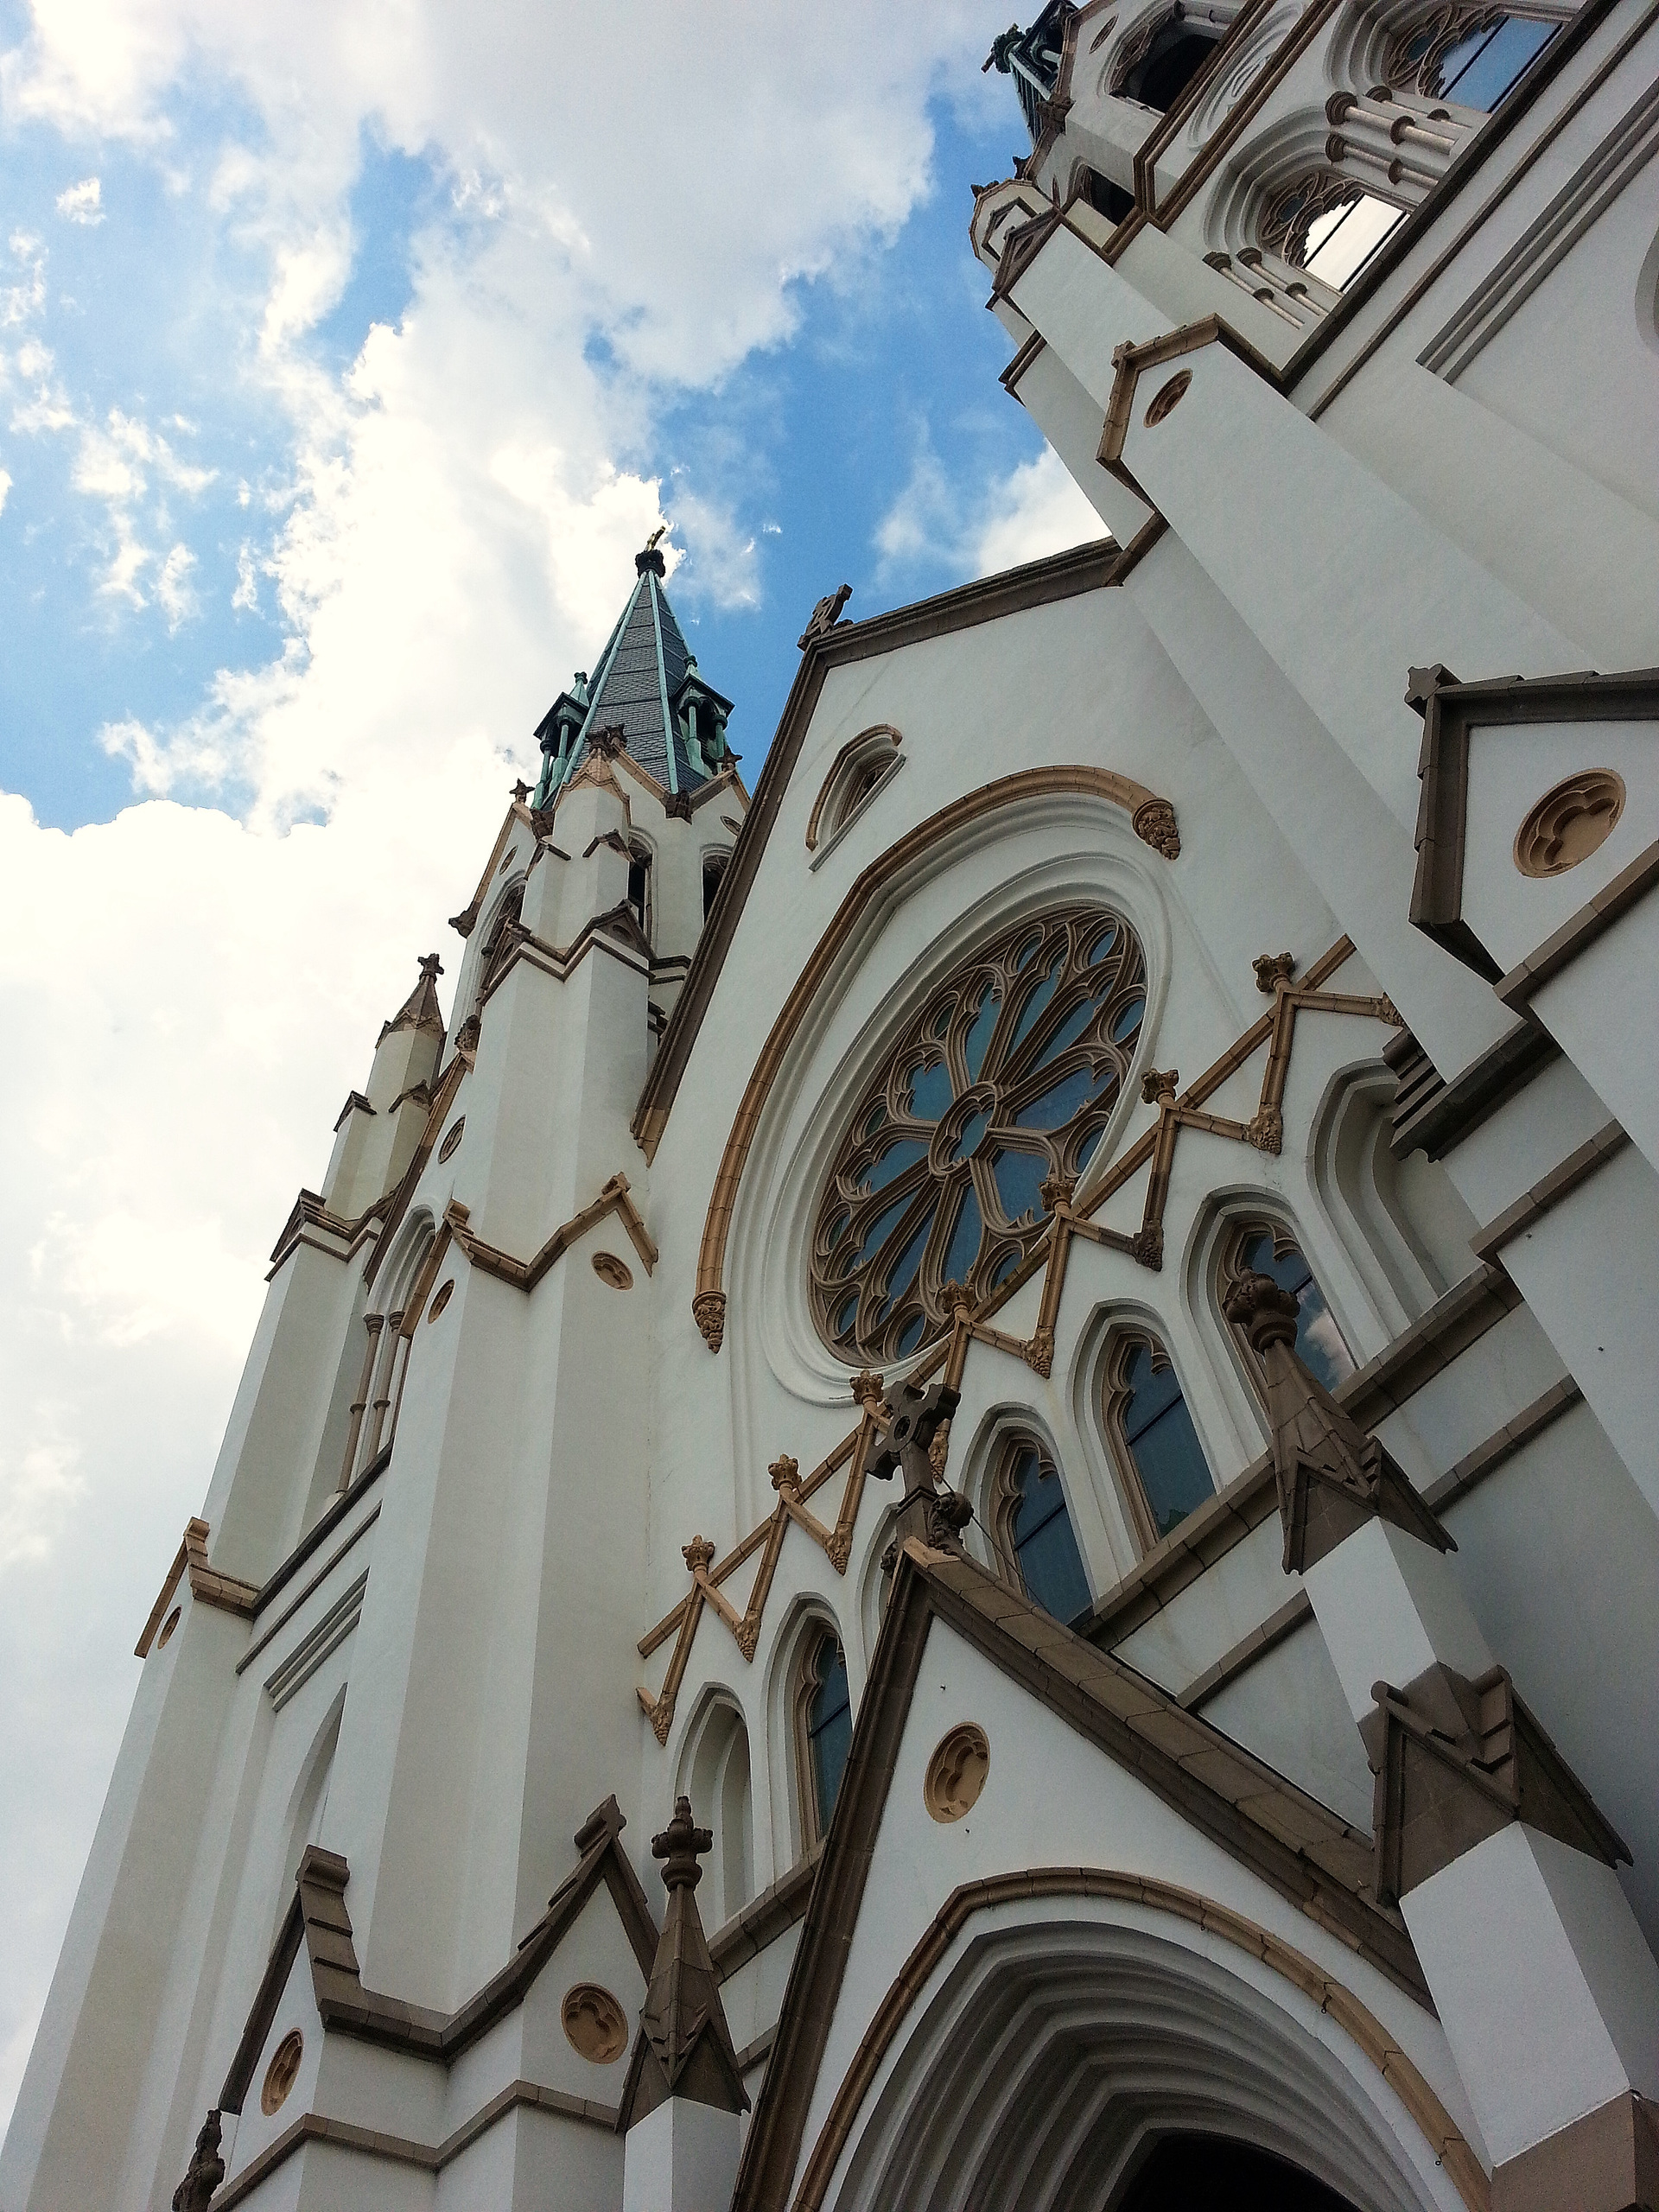 Foap.com: Low angle view of a church stock photo by earthchildsarah